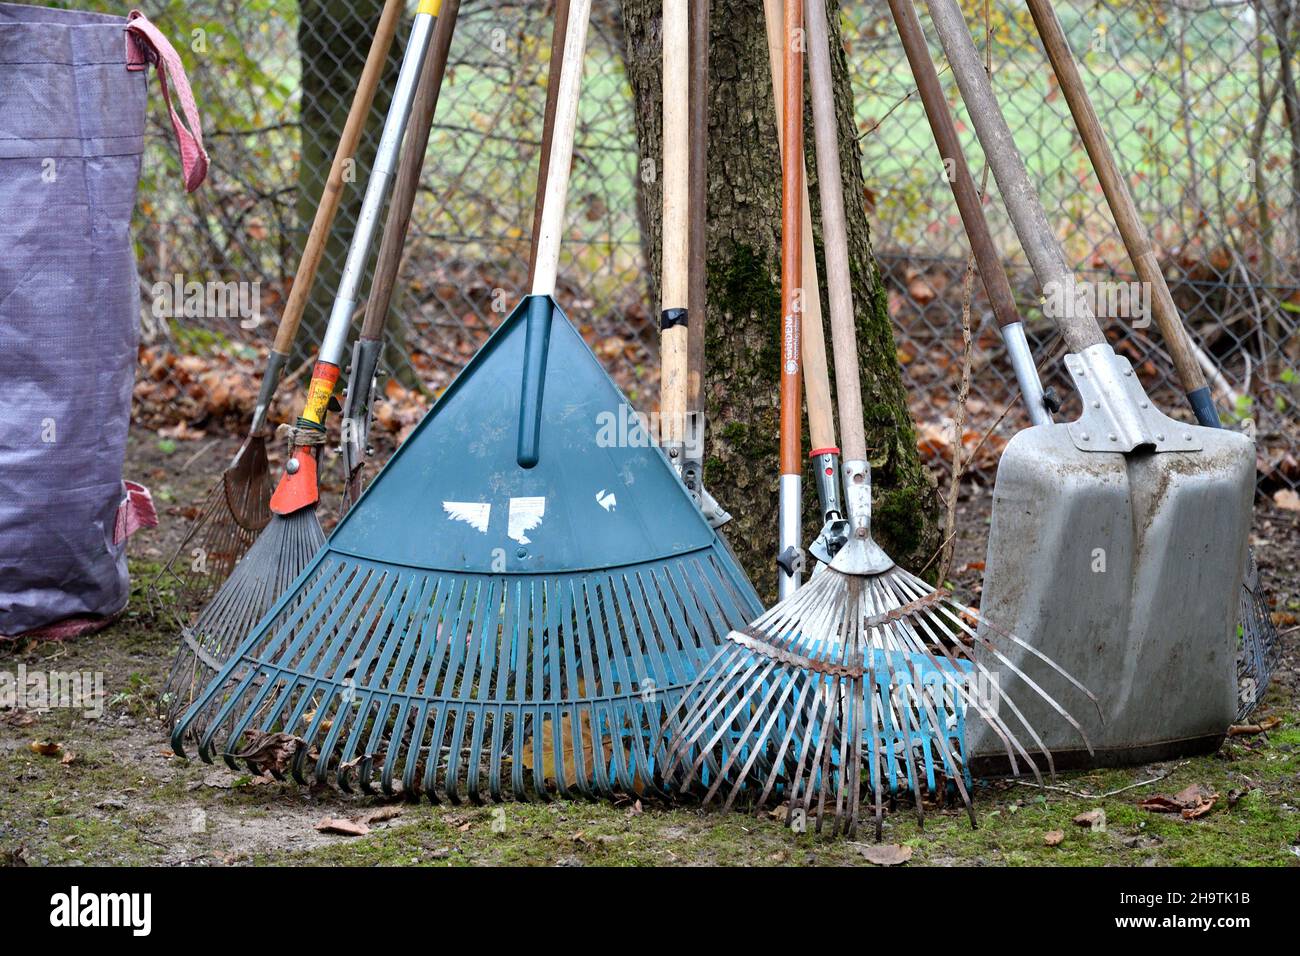 different garden rakes standing together at a tree , Germany, North Rhine-Westphalia, Ruhr Area, Dortmund Stock Photo